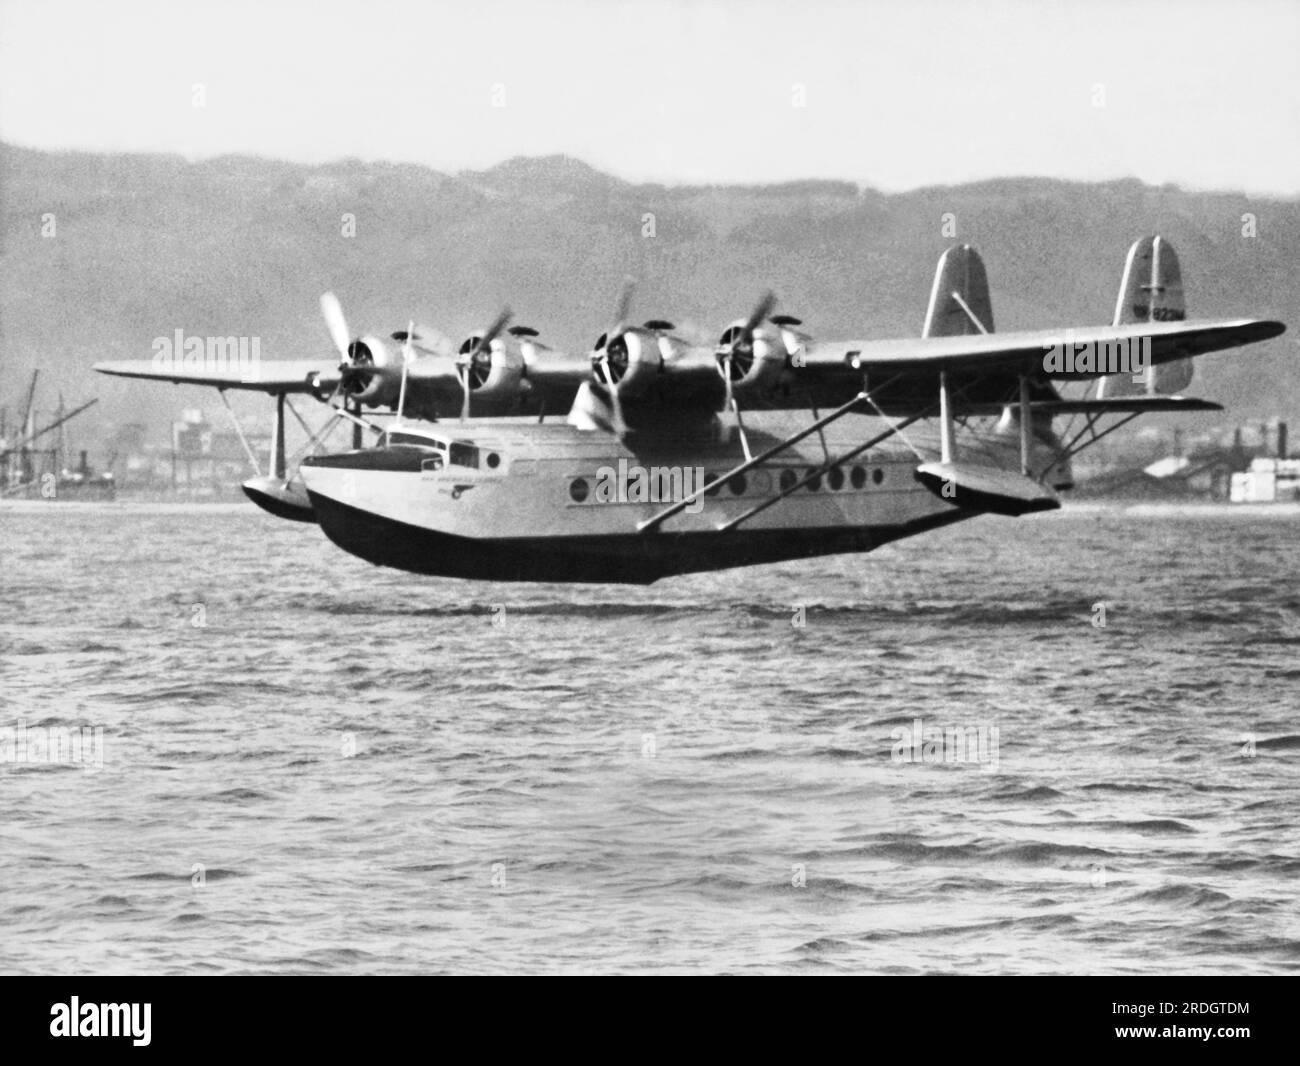 Oakland, California: April 23, 1935 The Pan American Clipper flying boat as it landed in San Francisco Bay becoming the first aircraft to complete a round trip flight between Hawaii and California. The return flight from Honolulu to Alameda took 21 hours. Stock Photo